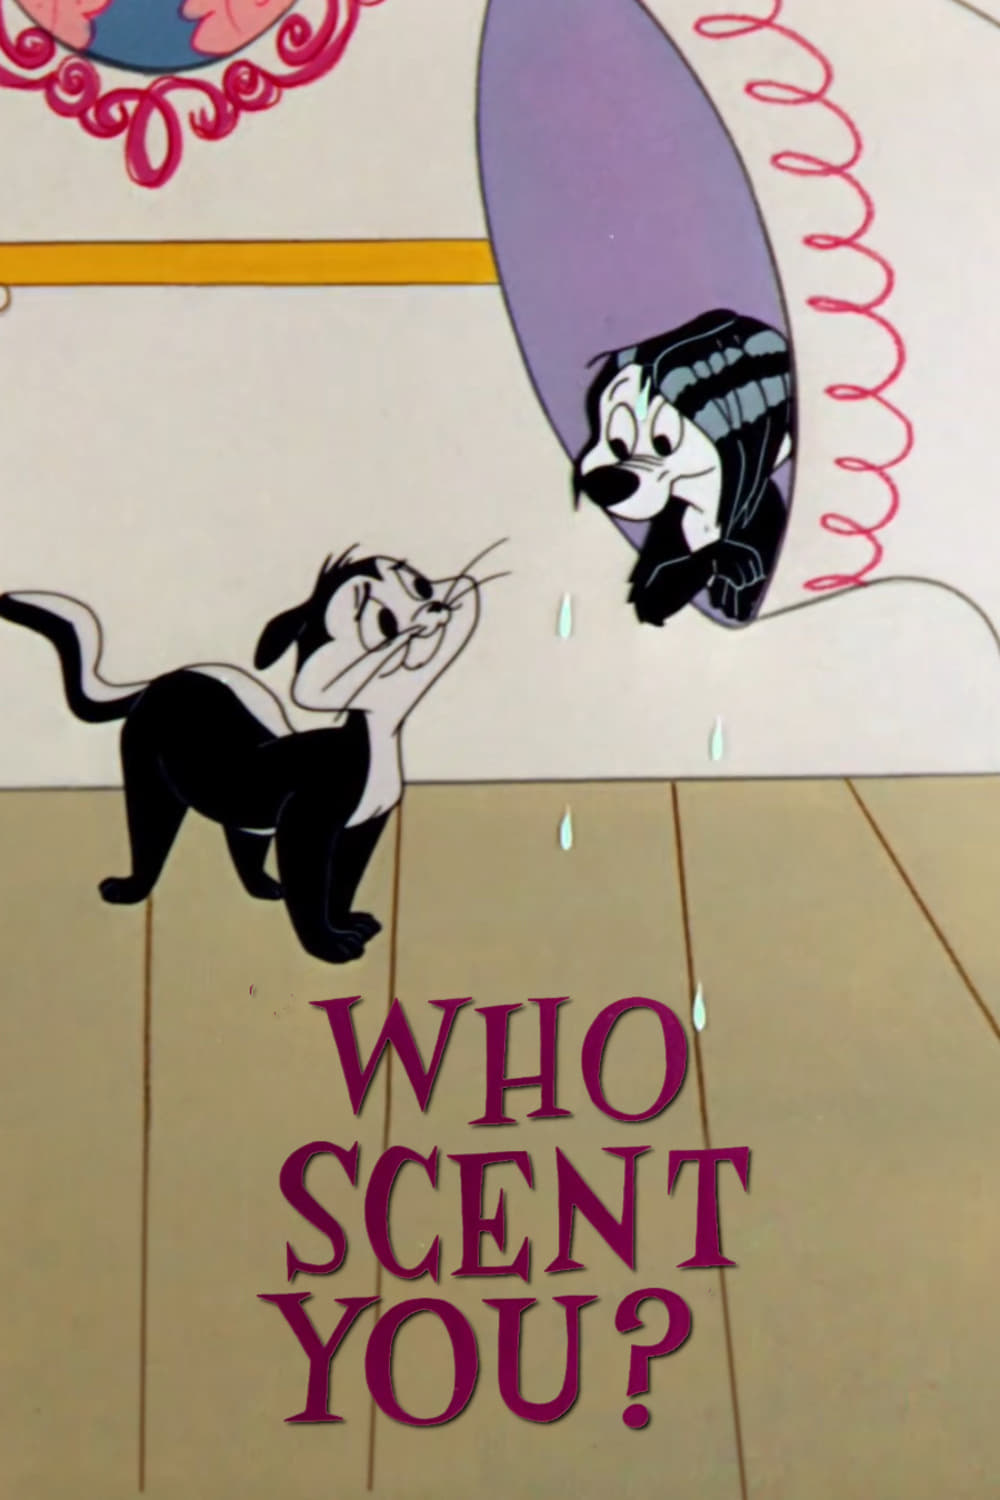 Who Scent You? (1960)